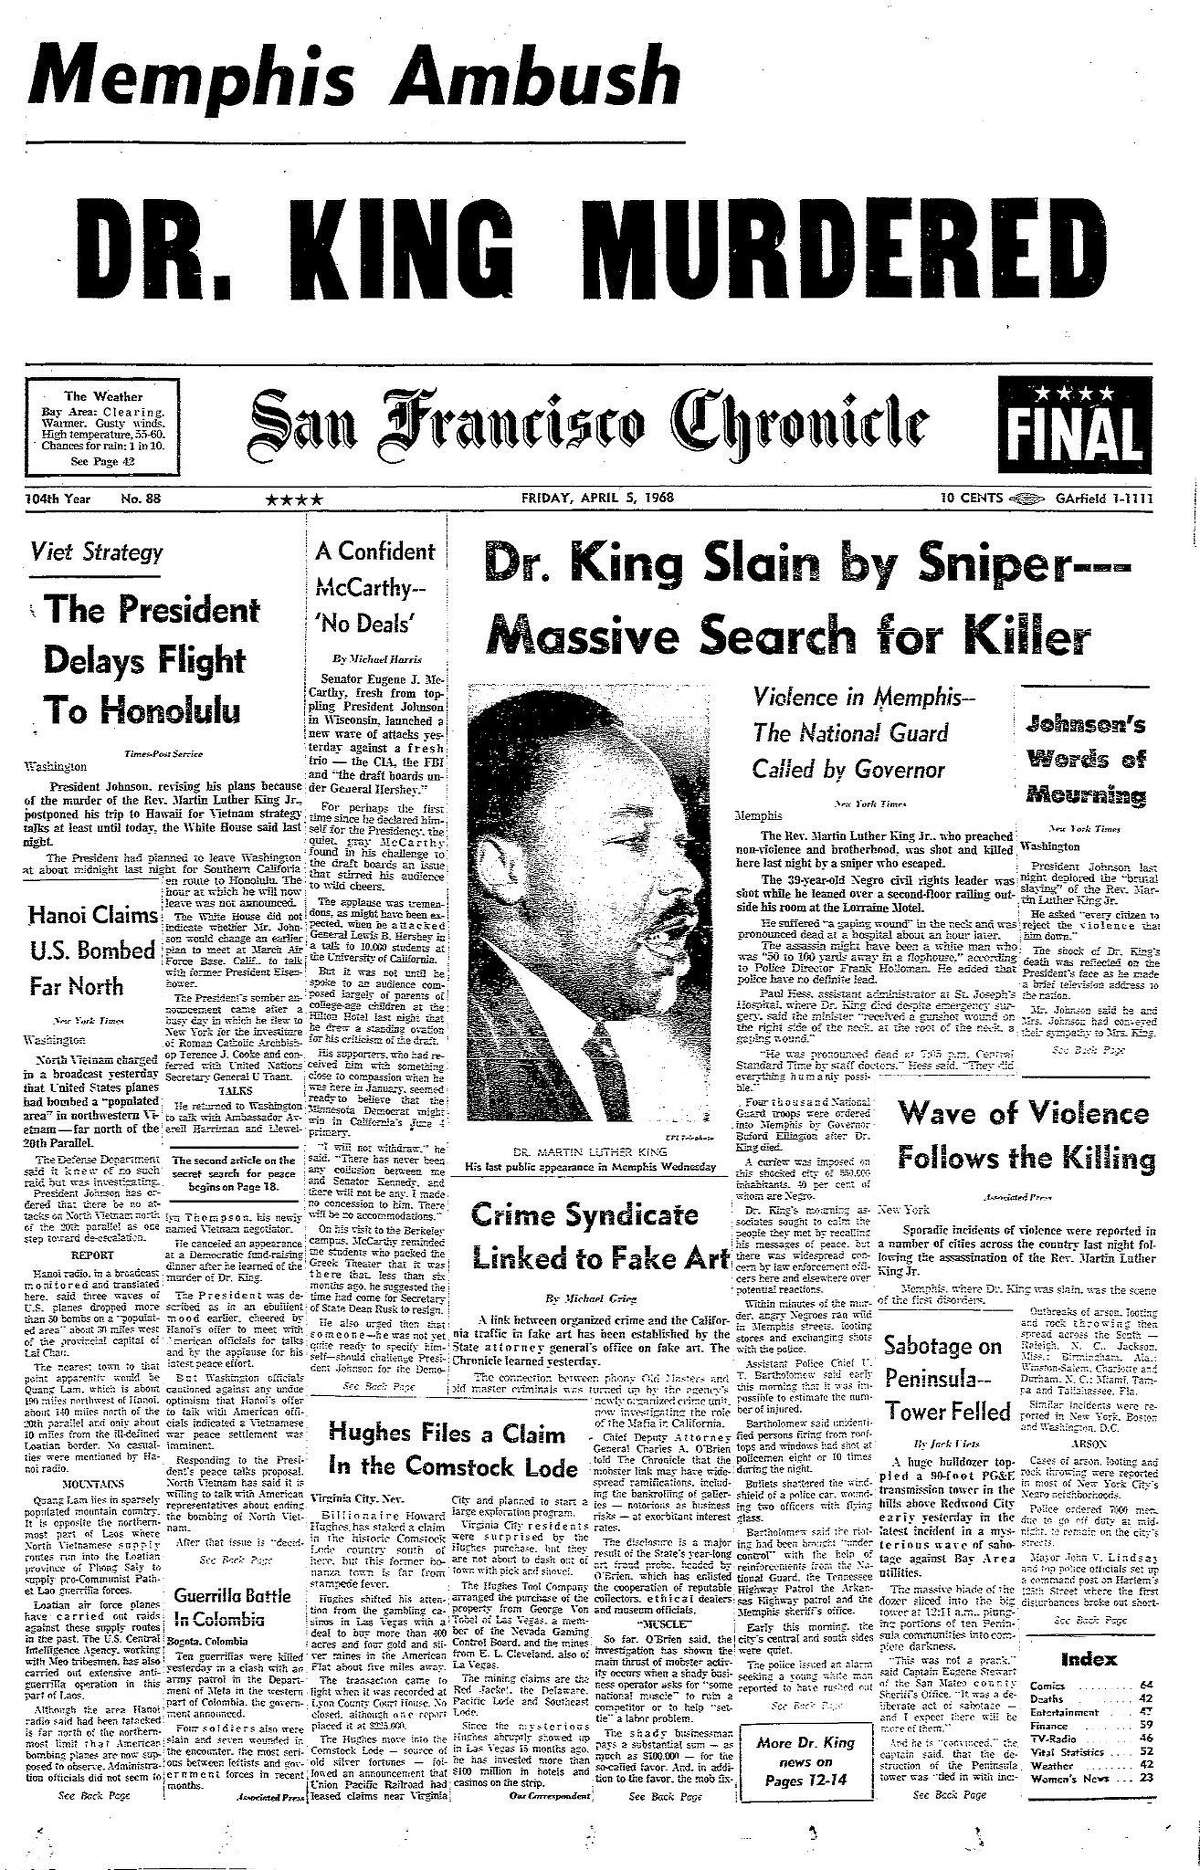 Chronicle Covers Martin Luther King Jr.'s assassination and the